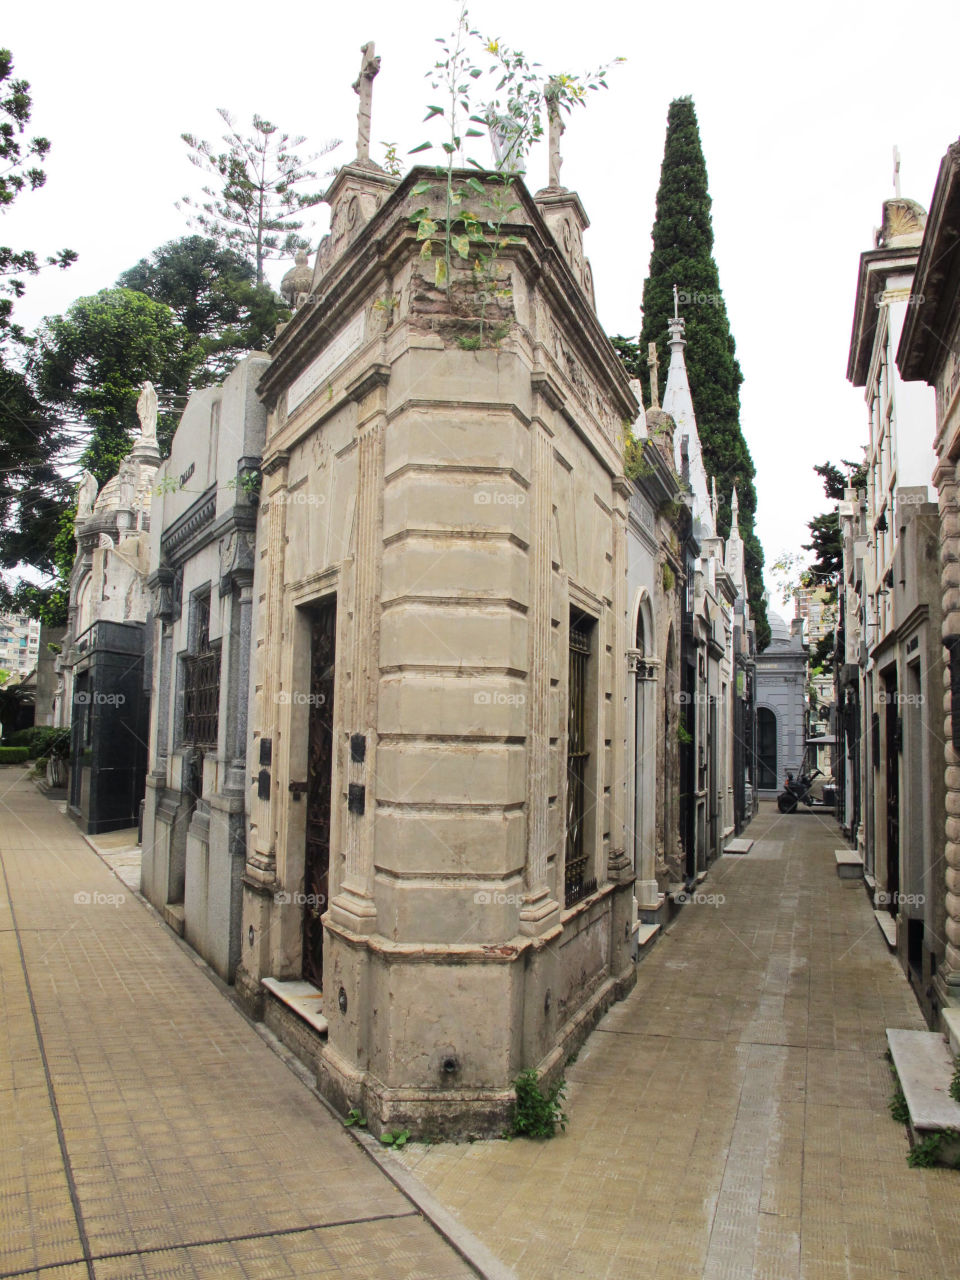 buenos aires tombs avenues la recoleta cemetery by jpt4u